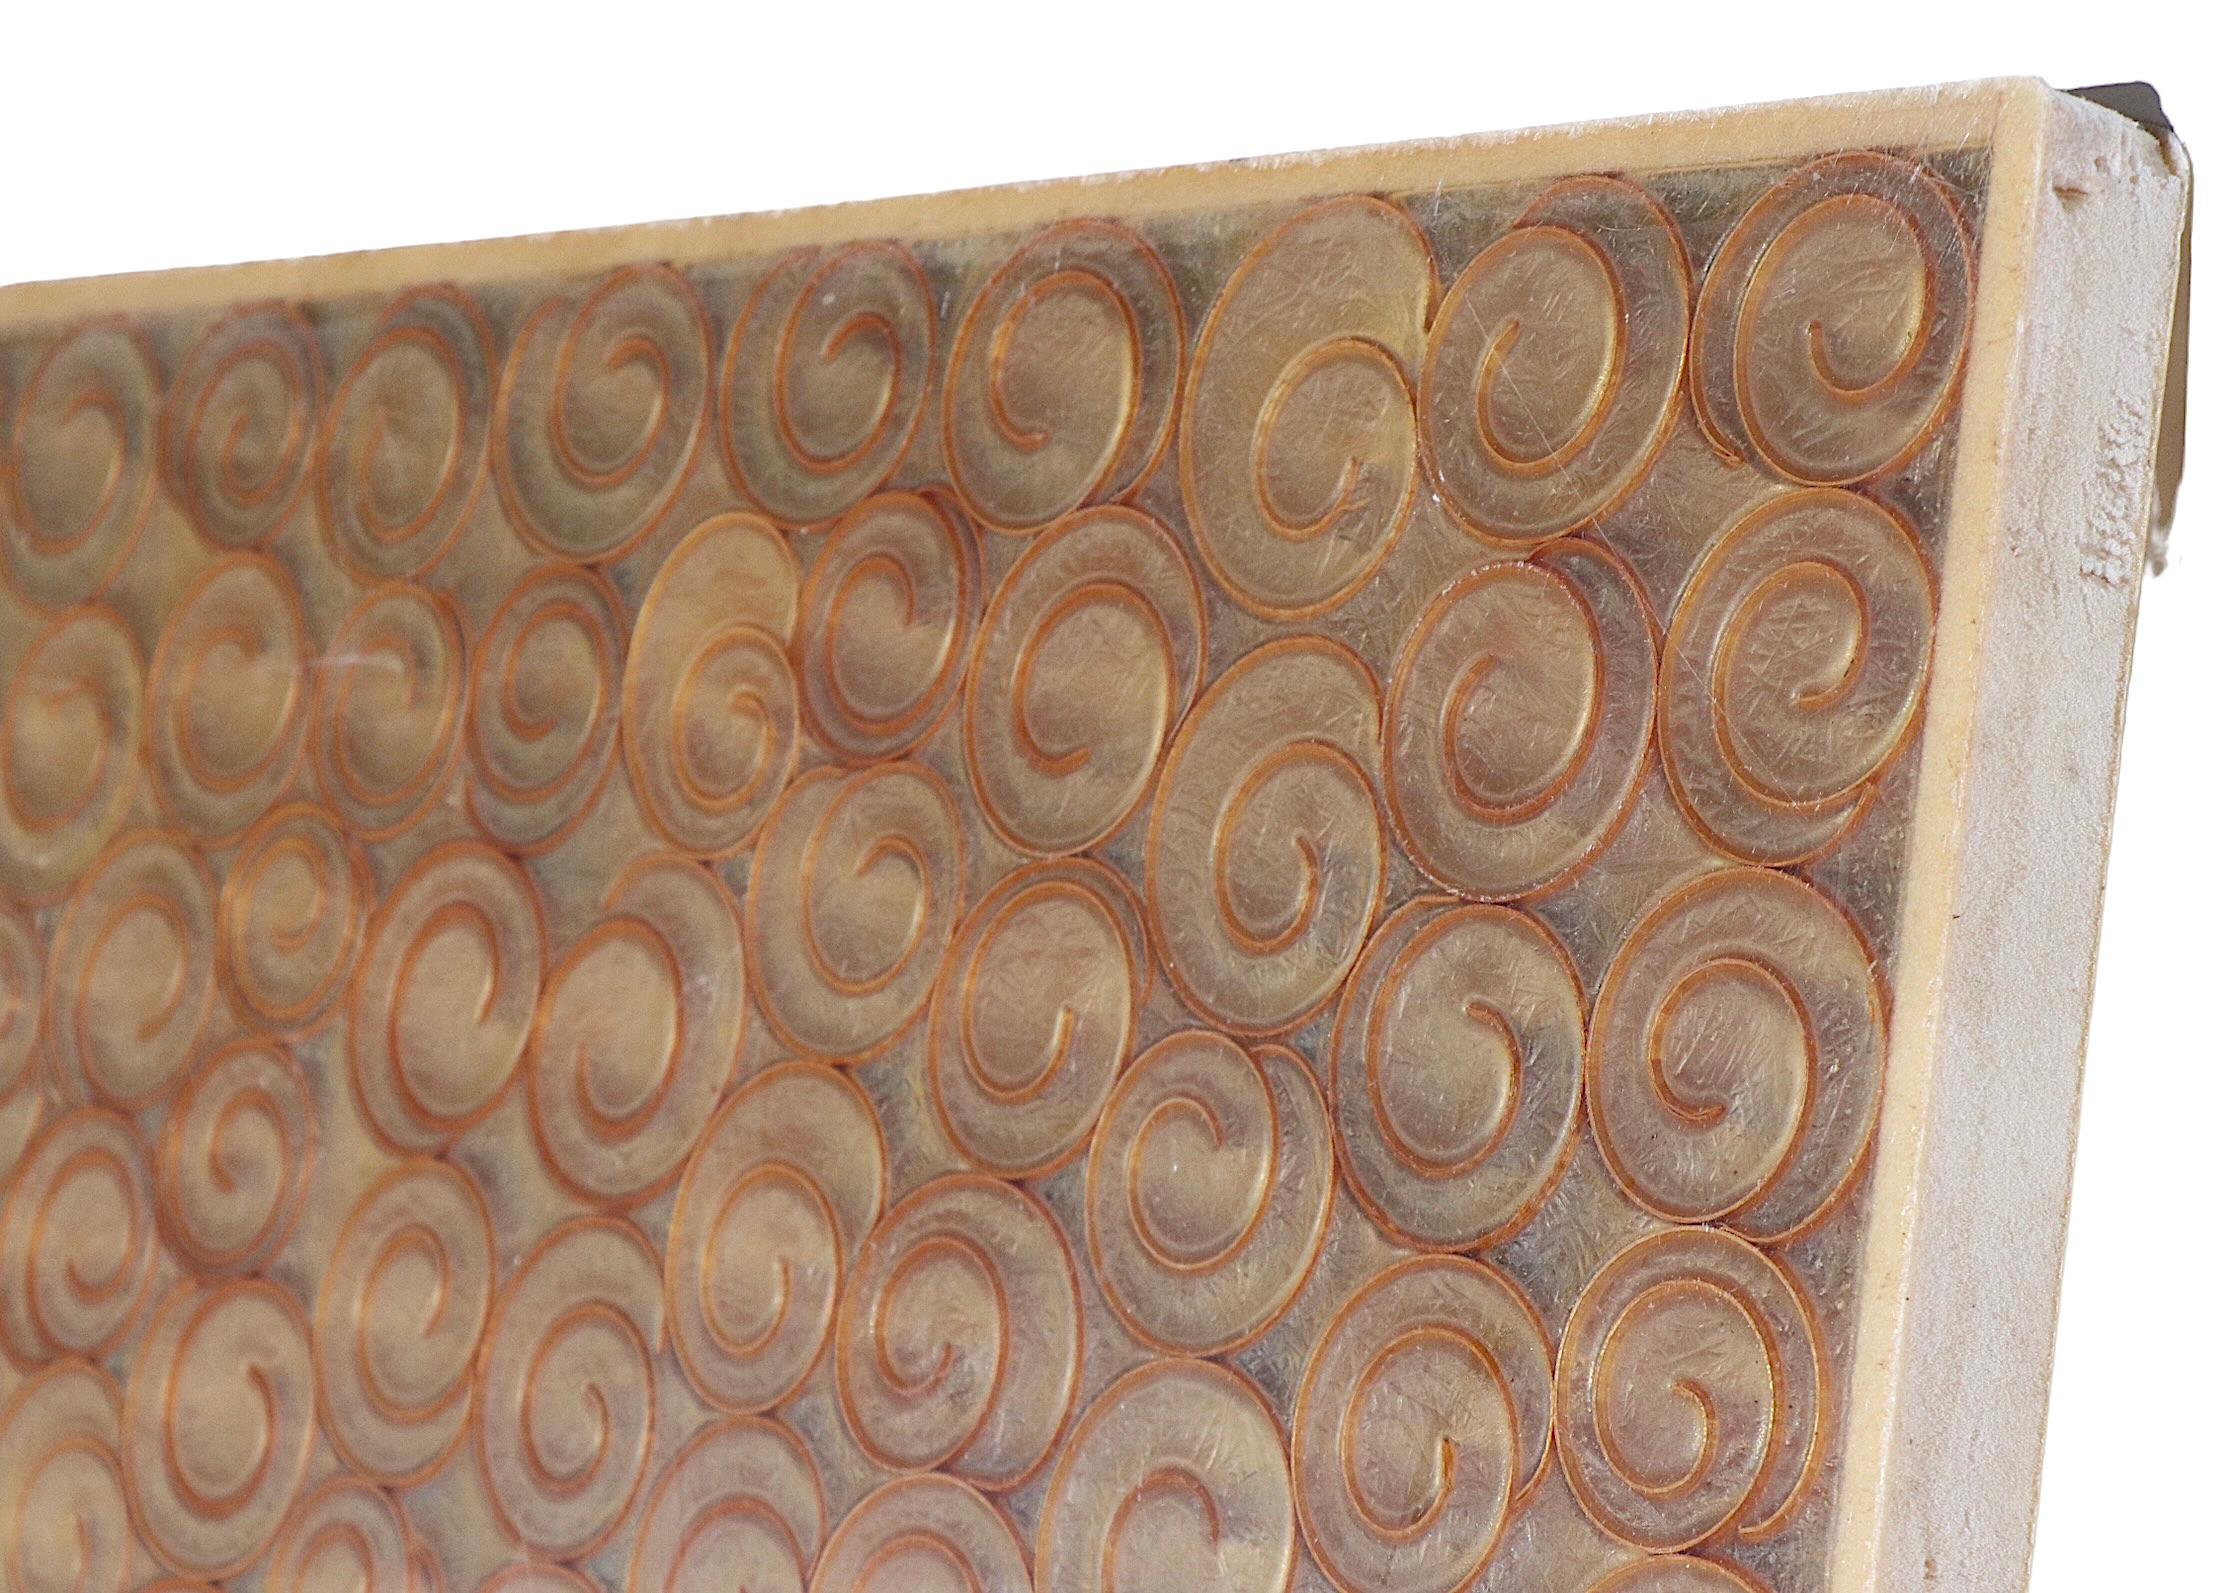 Modernist Translucent Architectural Panel with Repeating Curlicue Field Motif For Sale 8